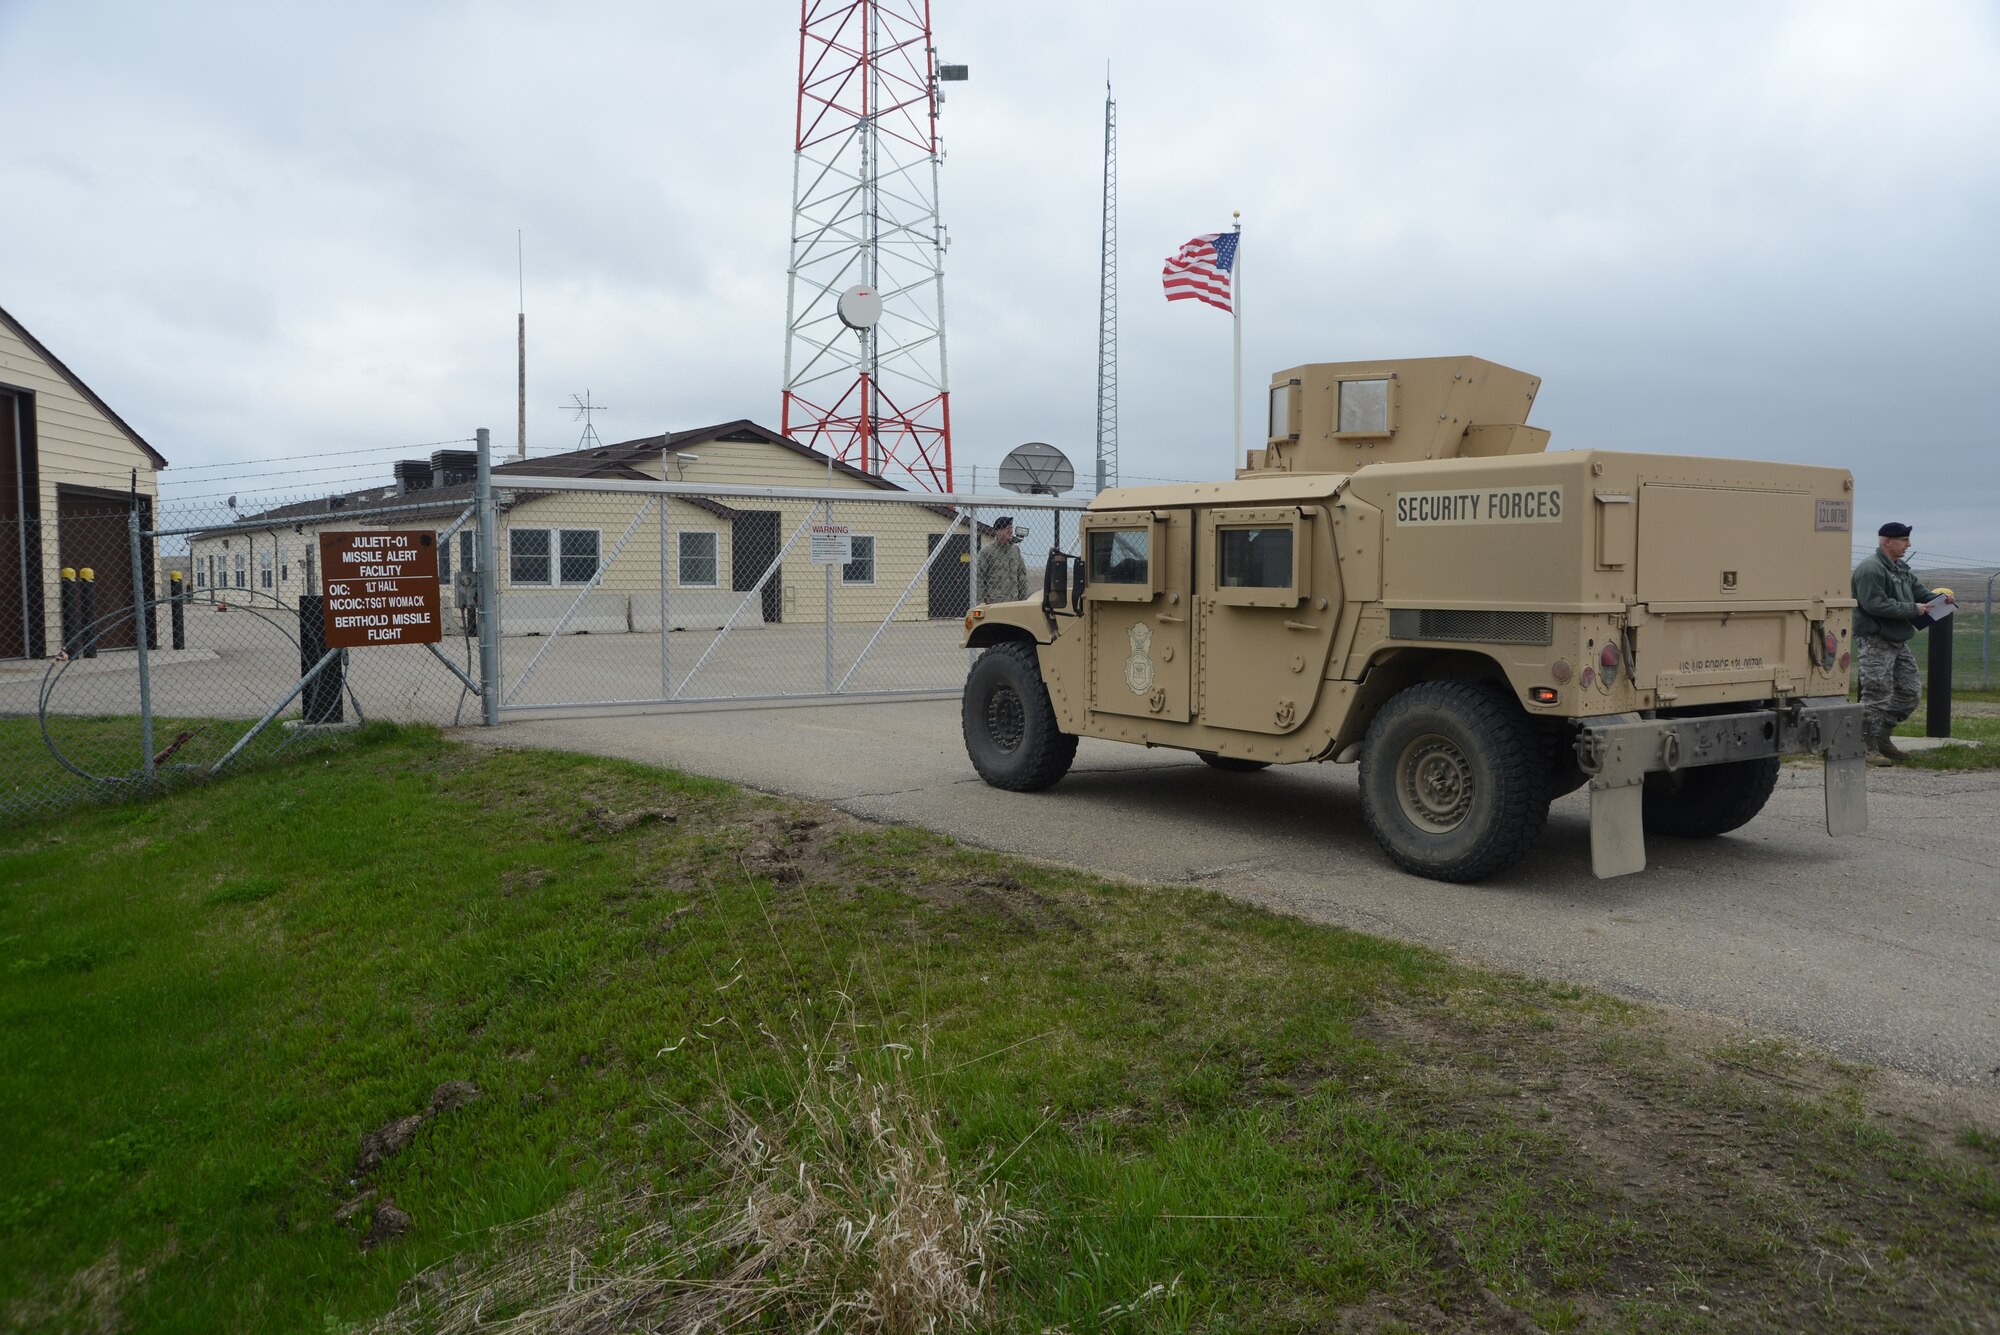 The 219th Security Forces Squadron personnel driving a High Mobility Multipurpose Wheeled Vehicle (HMMWV), commonly known as a Humvee, as they approach the gate of a missile alert facility in the Minot Air Force Base missile field complex near Minot, N.D., May 20, 2014. The 219th Security Forces Squadron personnel are members of the North Dakota Air National Guard doing their annual training while performing the real-World mission of missile field security, which allows their active duty counterparts to catch up on other training and mission requirements.  (U.S. Air National Guard photo by SMSgt. David H. Lipp)